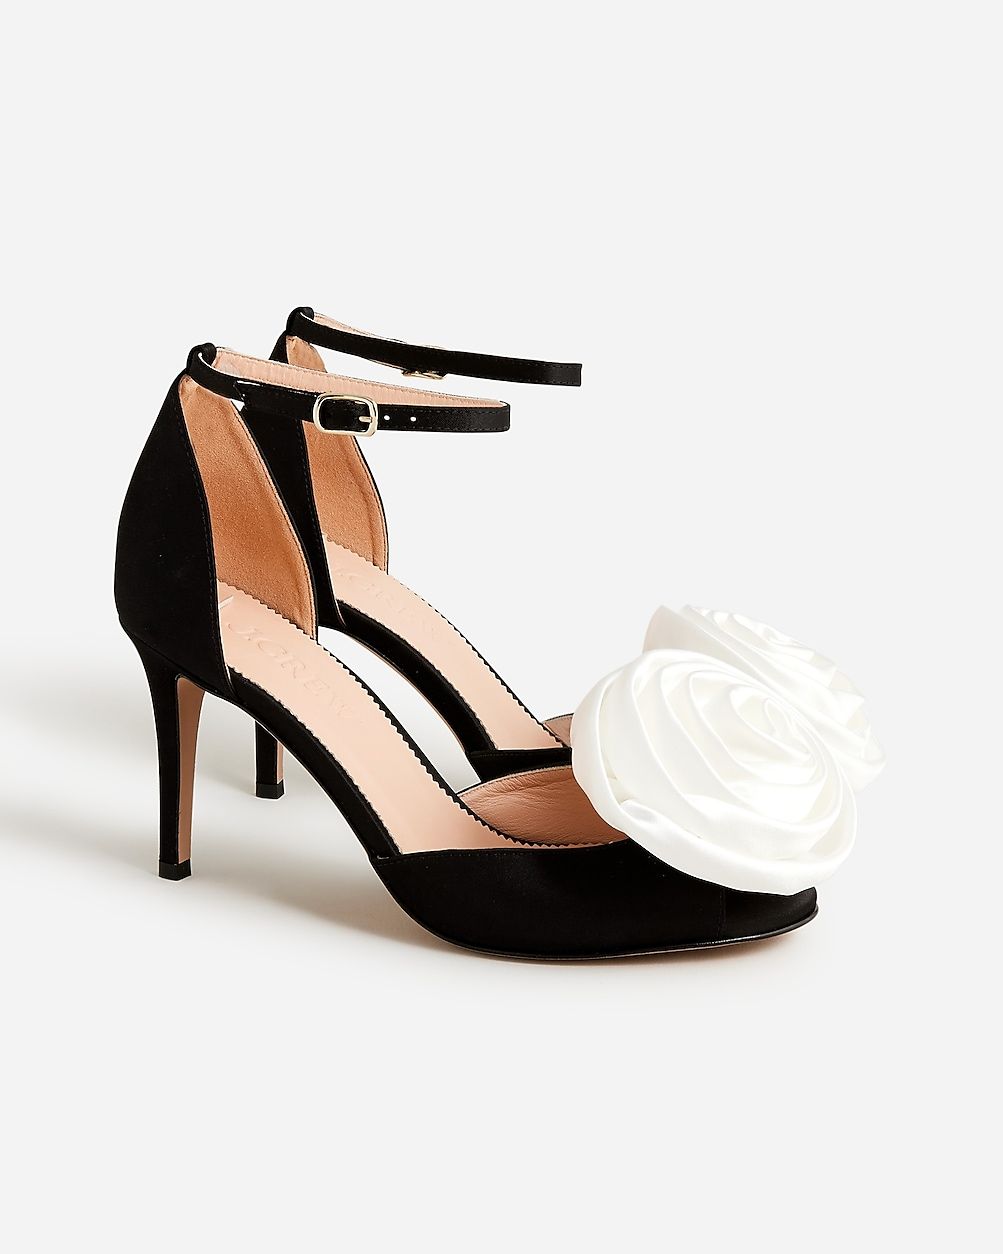 Collection Rylie rosette heels in satin | J.Crew US